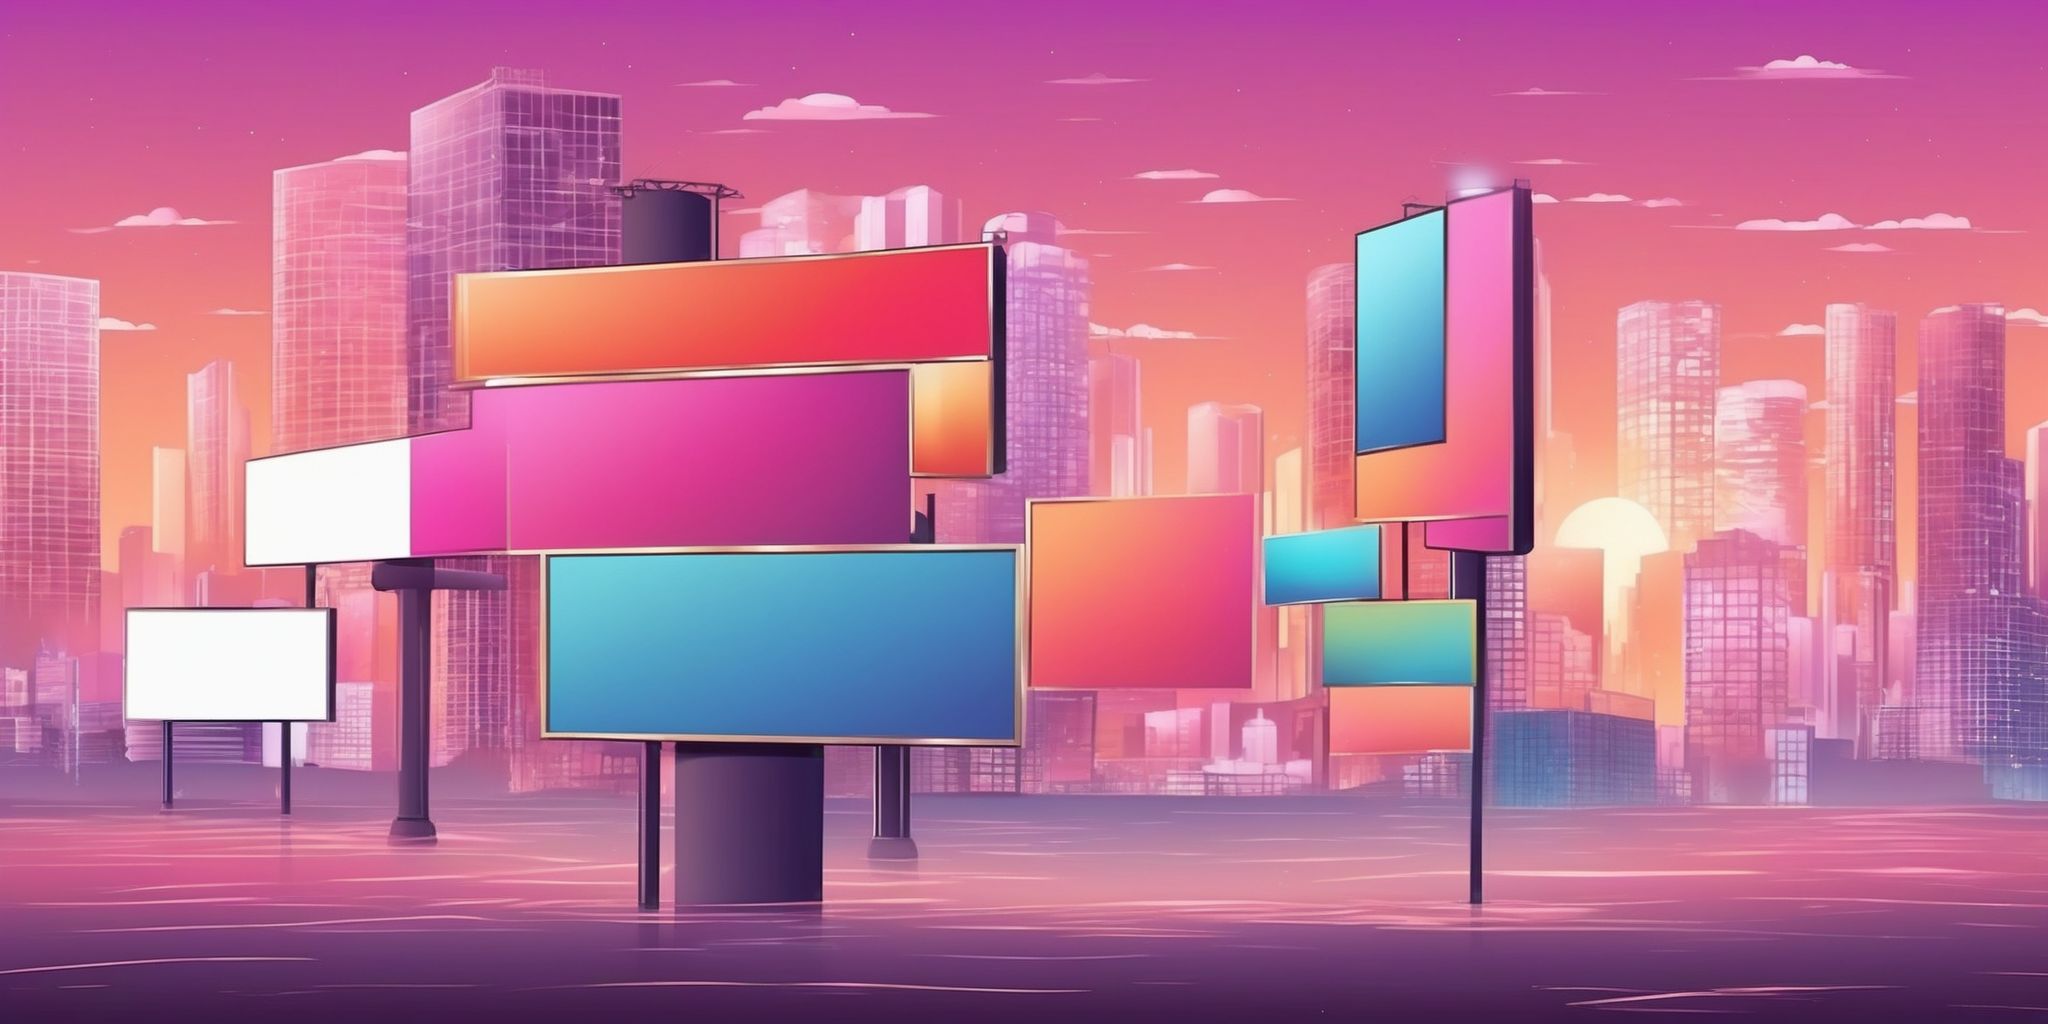 billboard in illustration style with gradients and white background